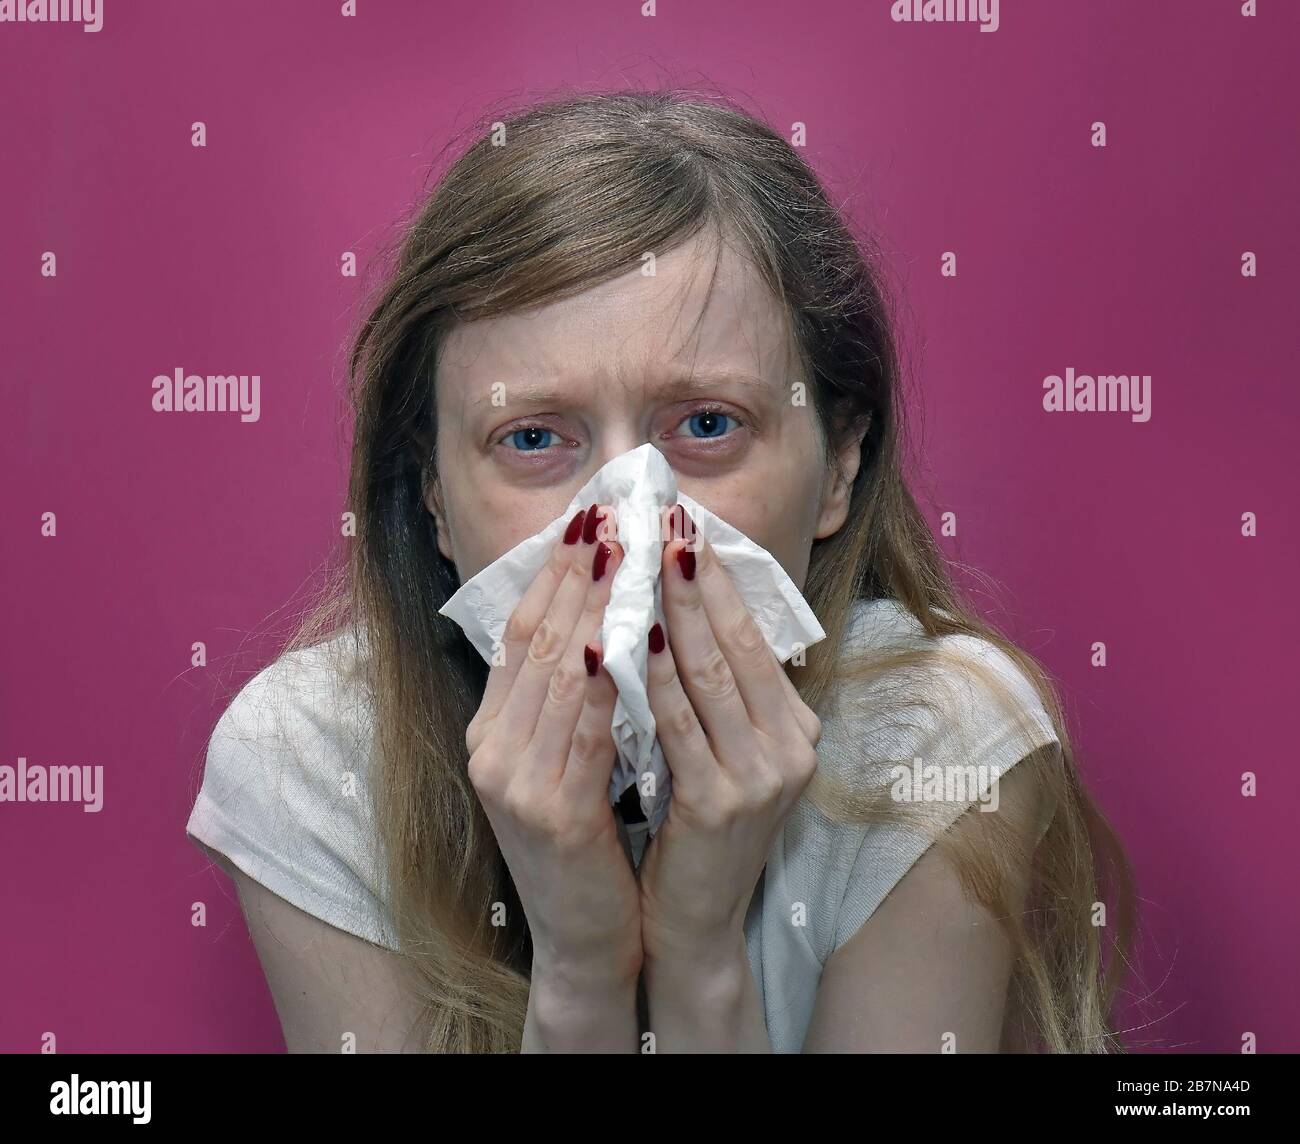 Sick young woman blowing her nose into paper tissue Stock Photo